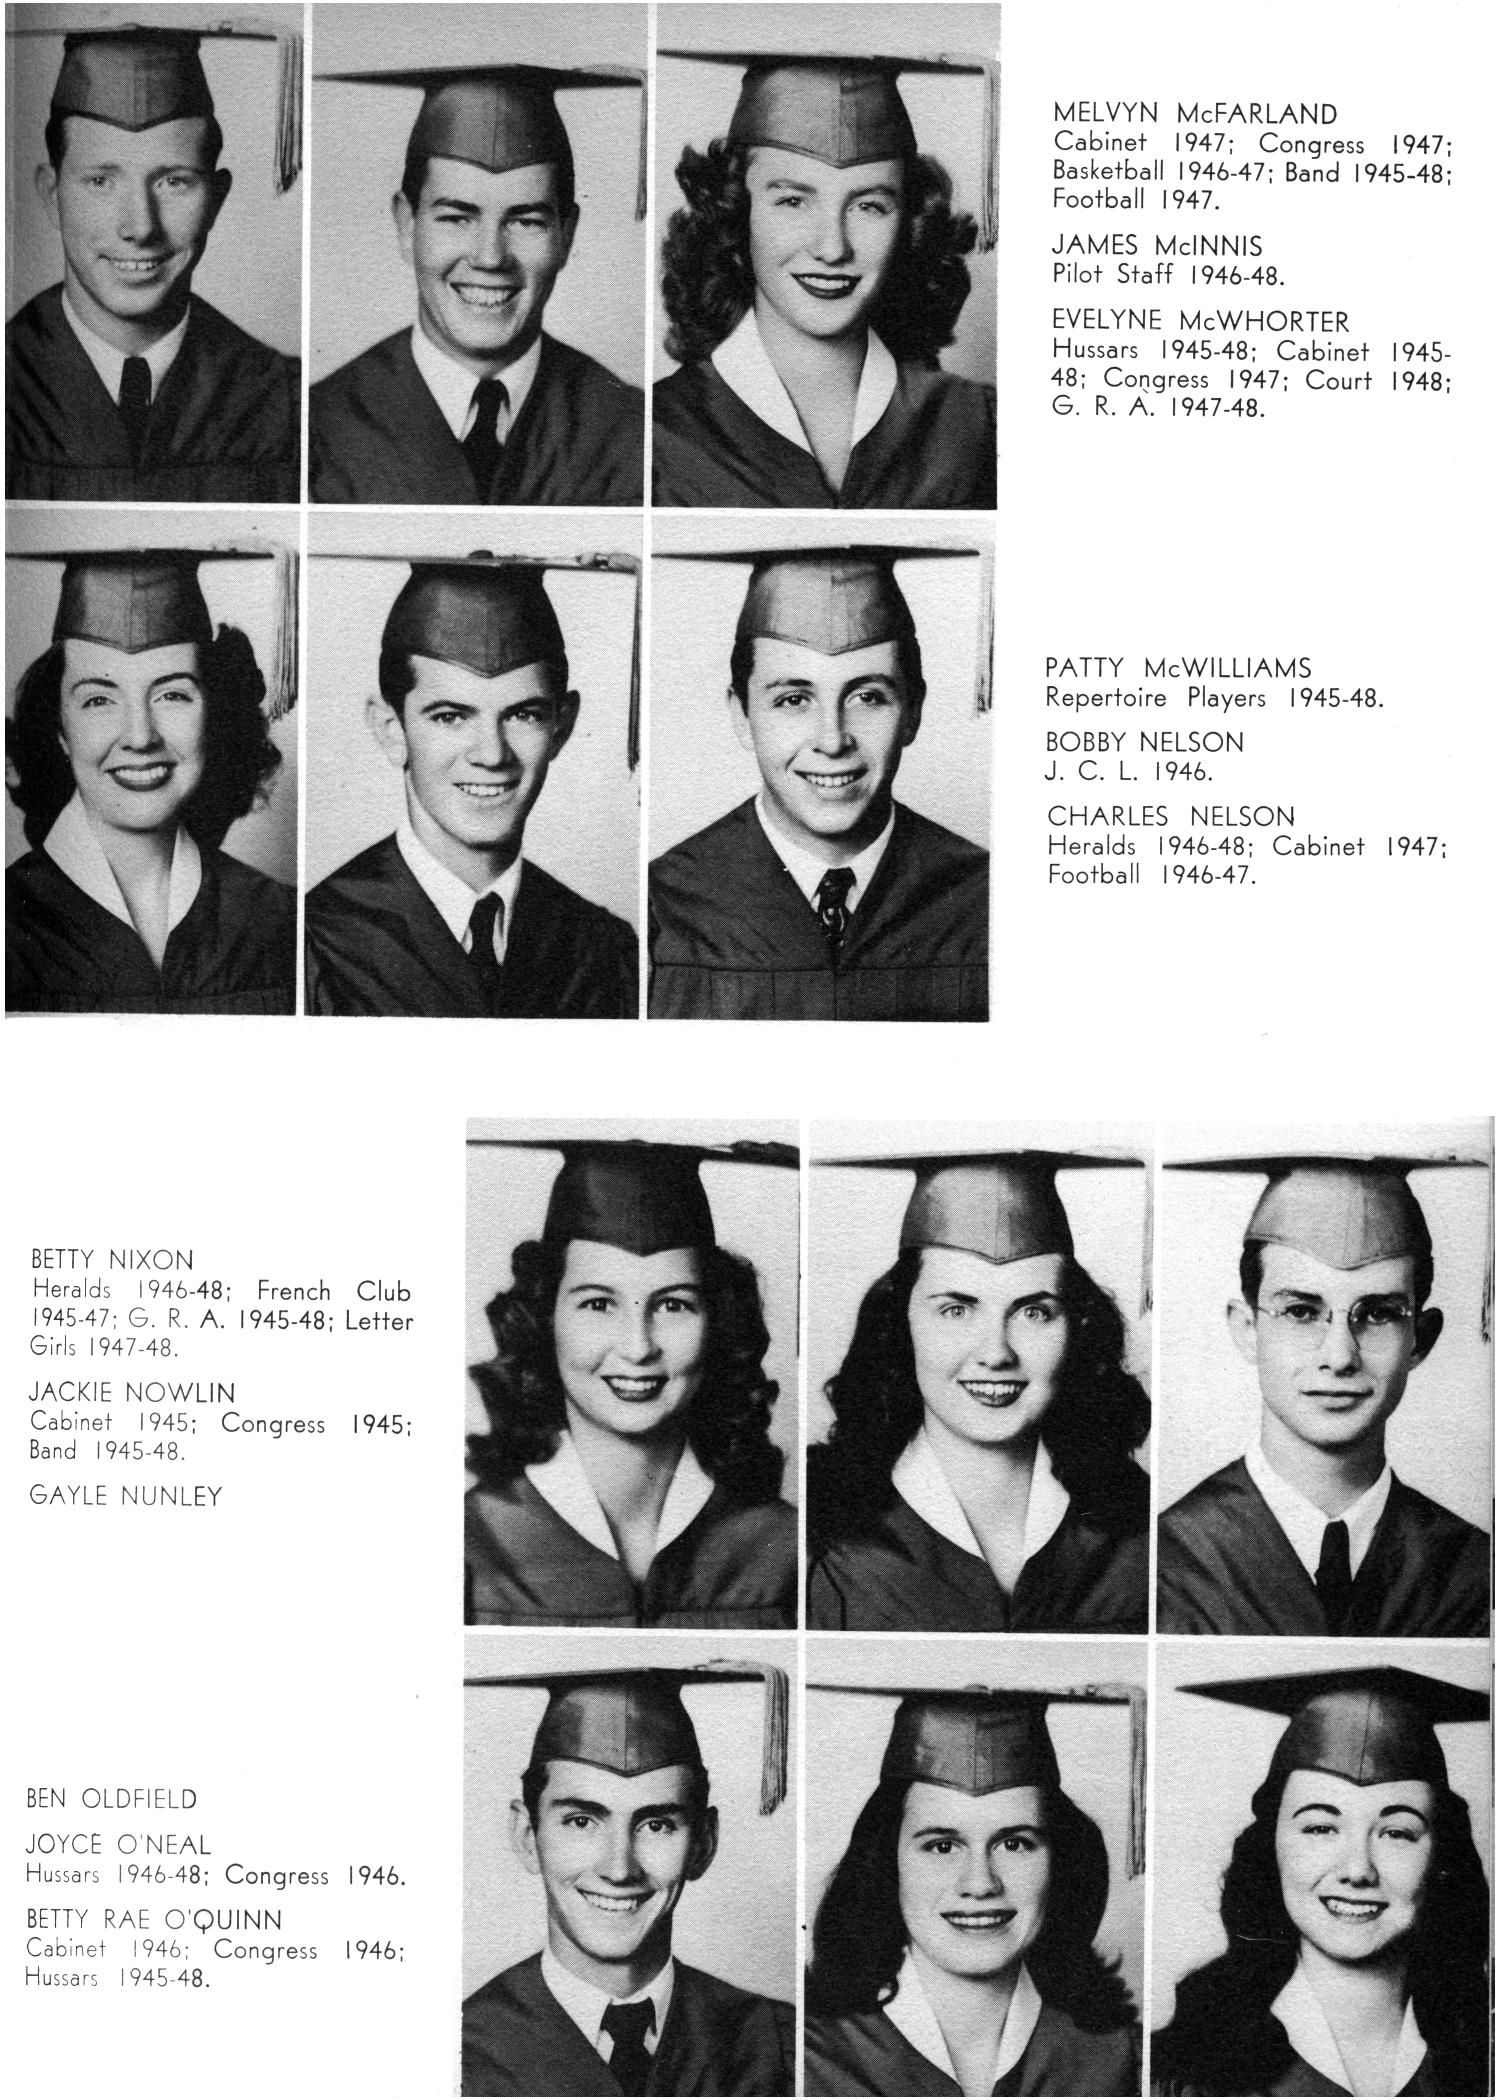 The Yellow Jacket, Yearbook of Thomas Jefferson High School, 1948
                                                
                                                    43
                                                